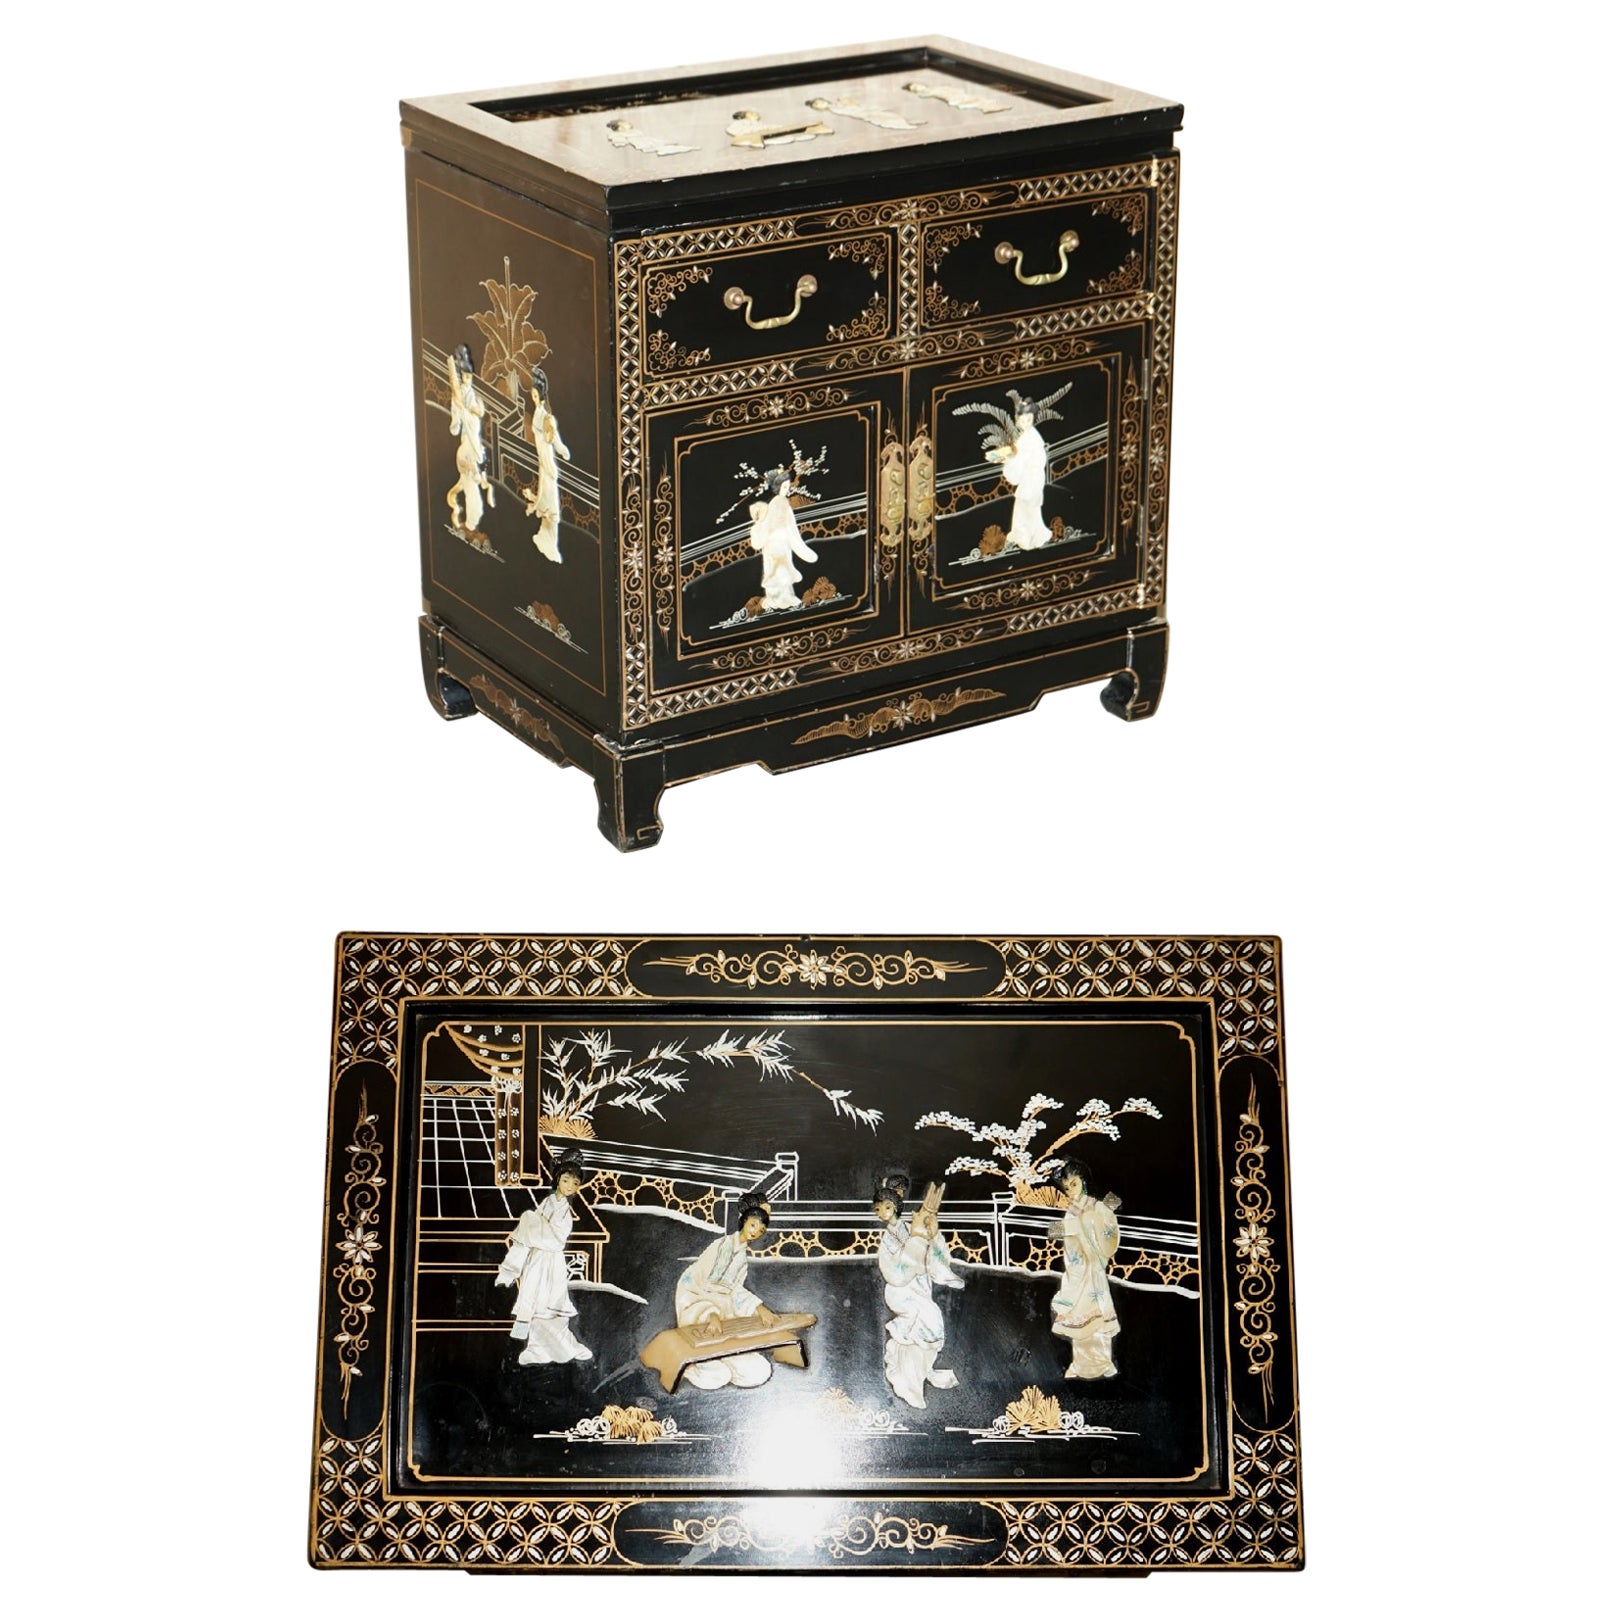 Stunning CHINOISERIE GEISHA GIRLS LACQUER SiDE CABINET SOAPSTONE en vente